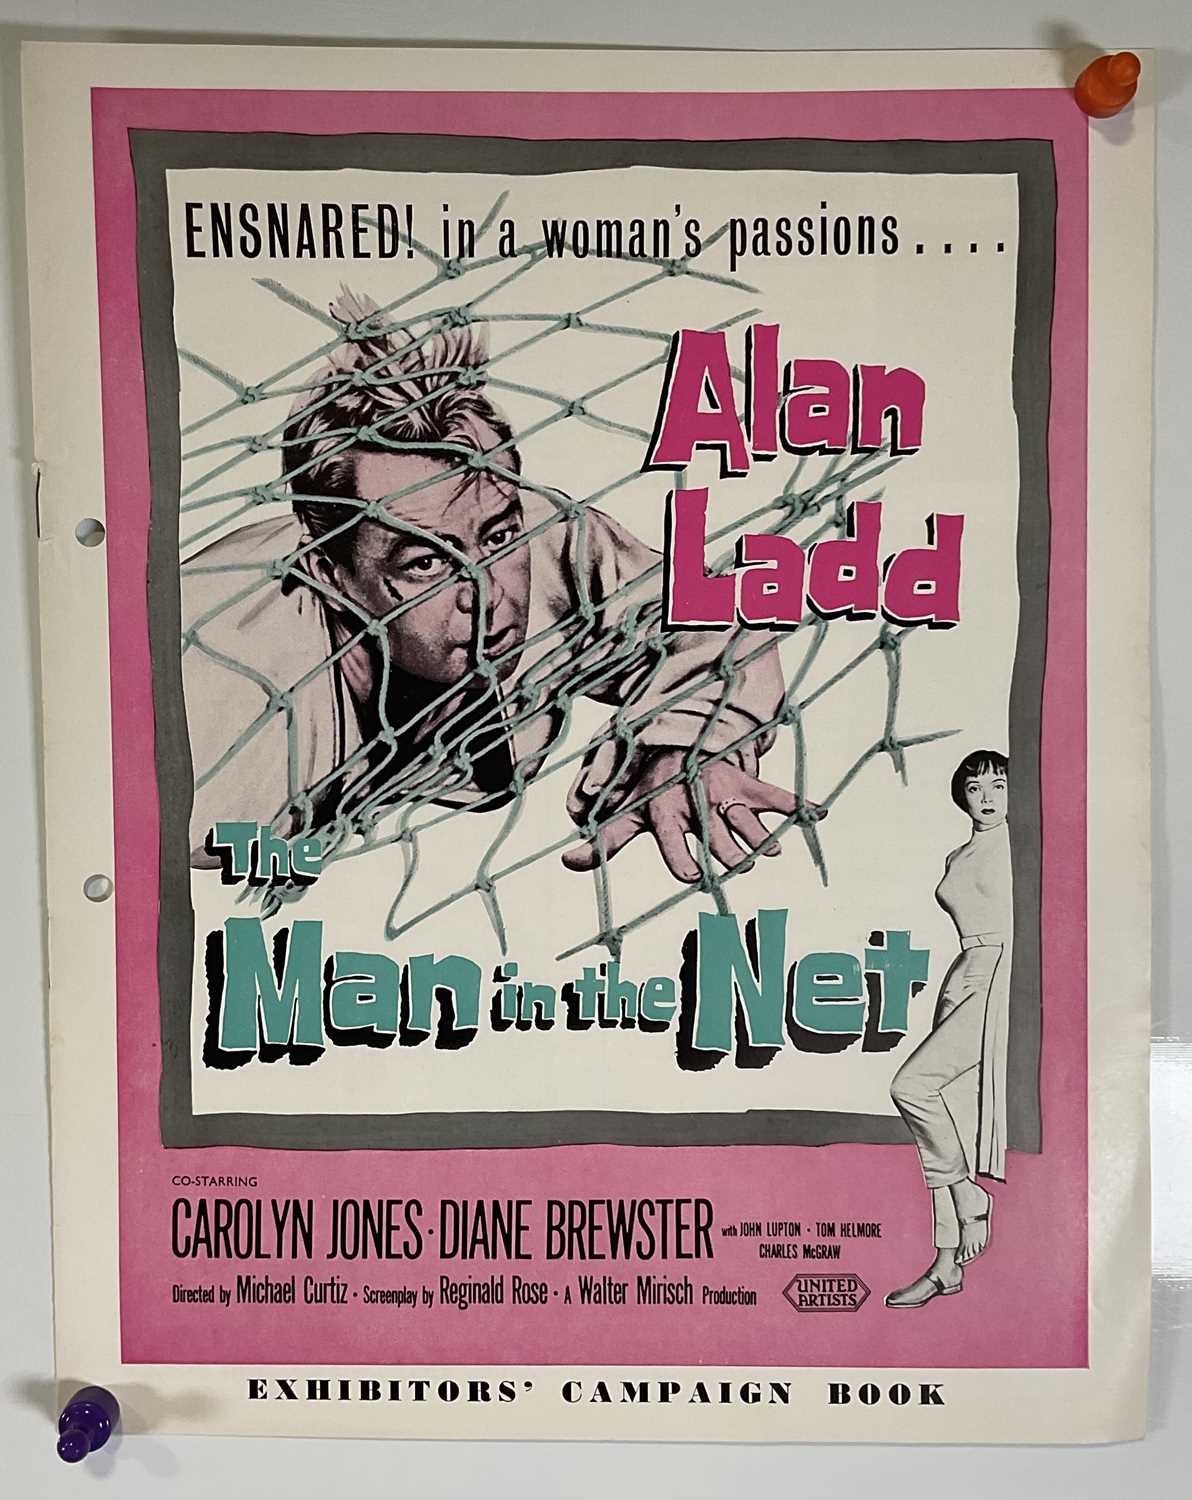 THE MAN IN THE NET (1959) US half sheet together with an exhibitors campaign book, Alan Ladd - Image 3 of 3